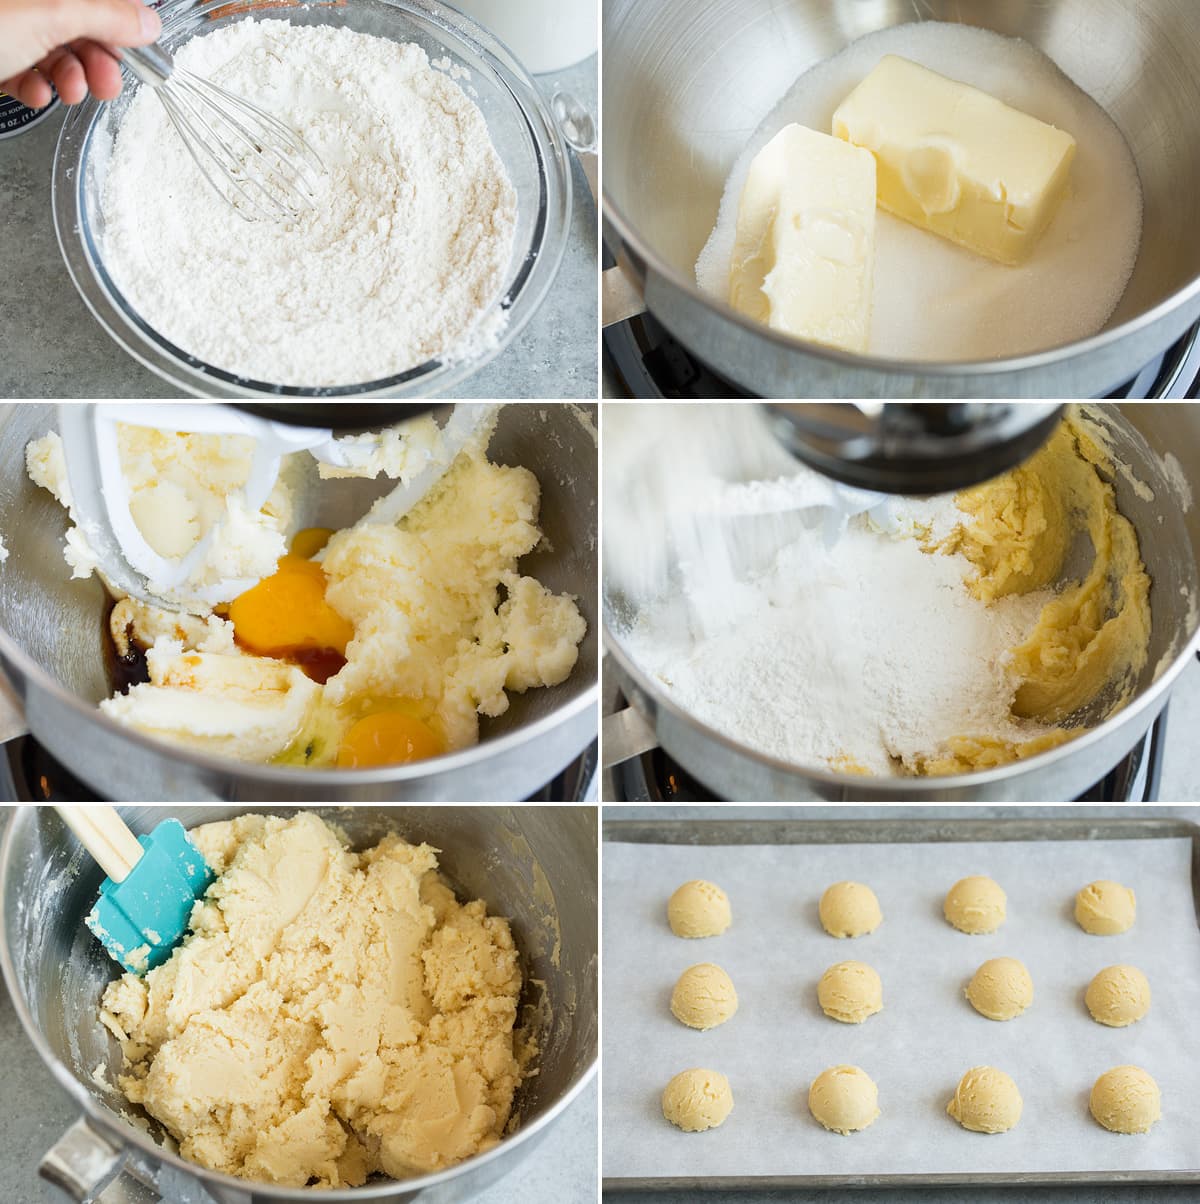 Collage of six photos showing steps of making sugar cookie dough and shaping.